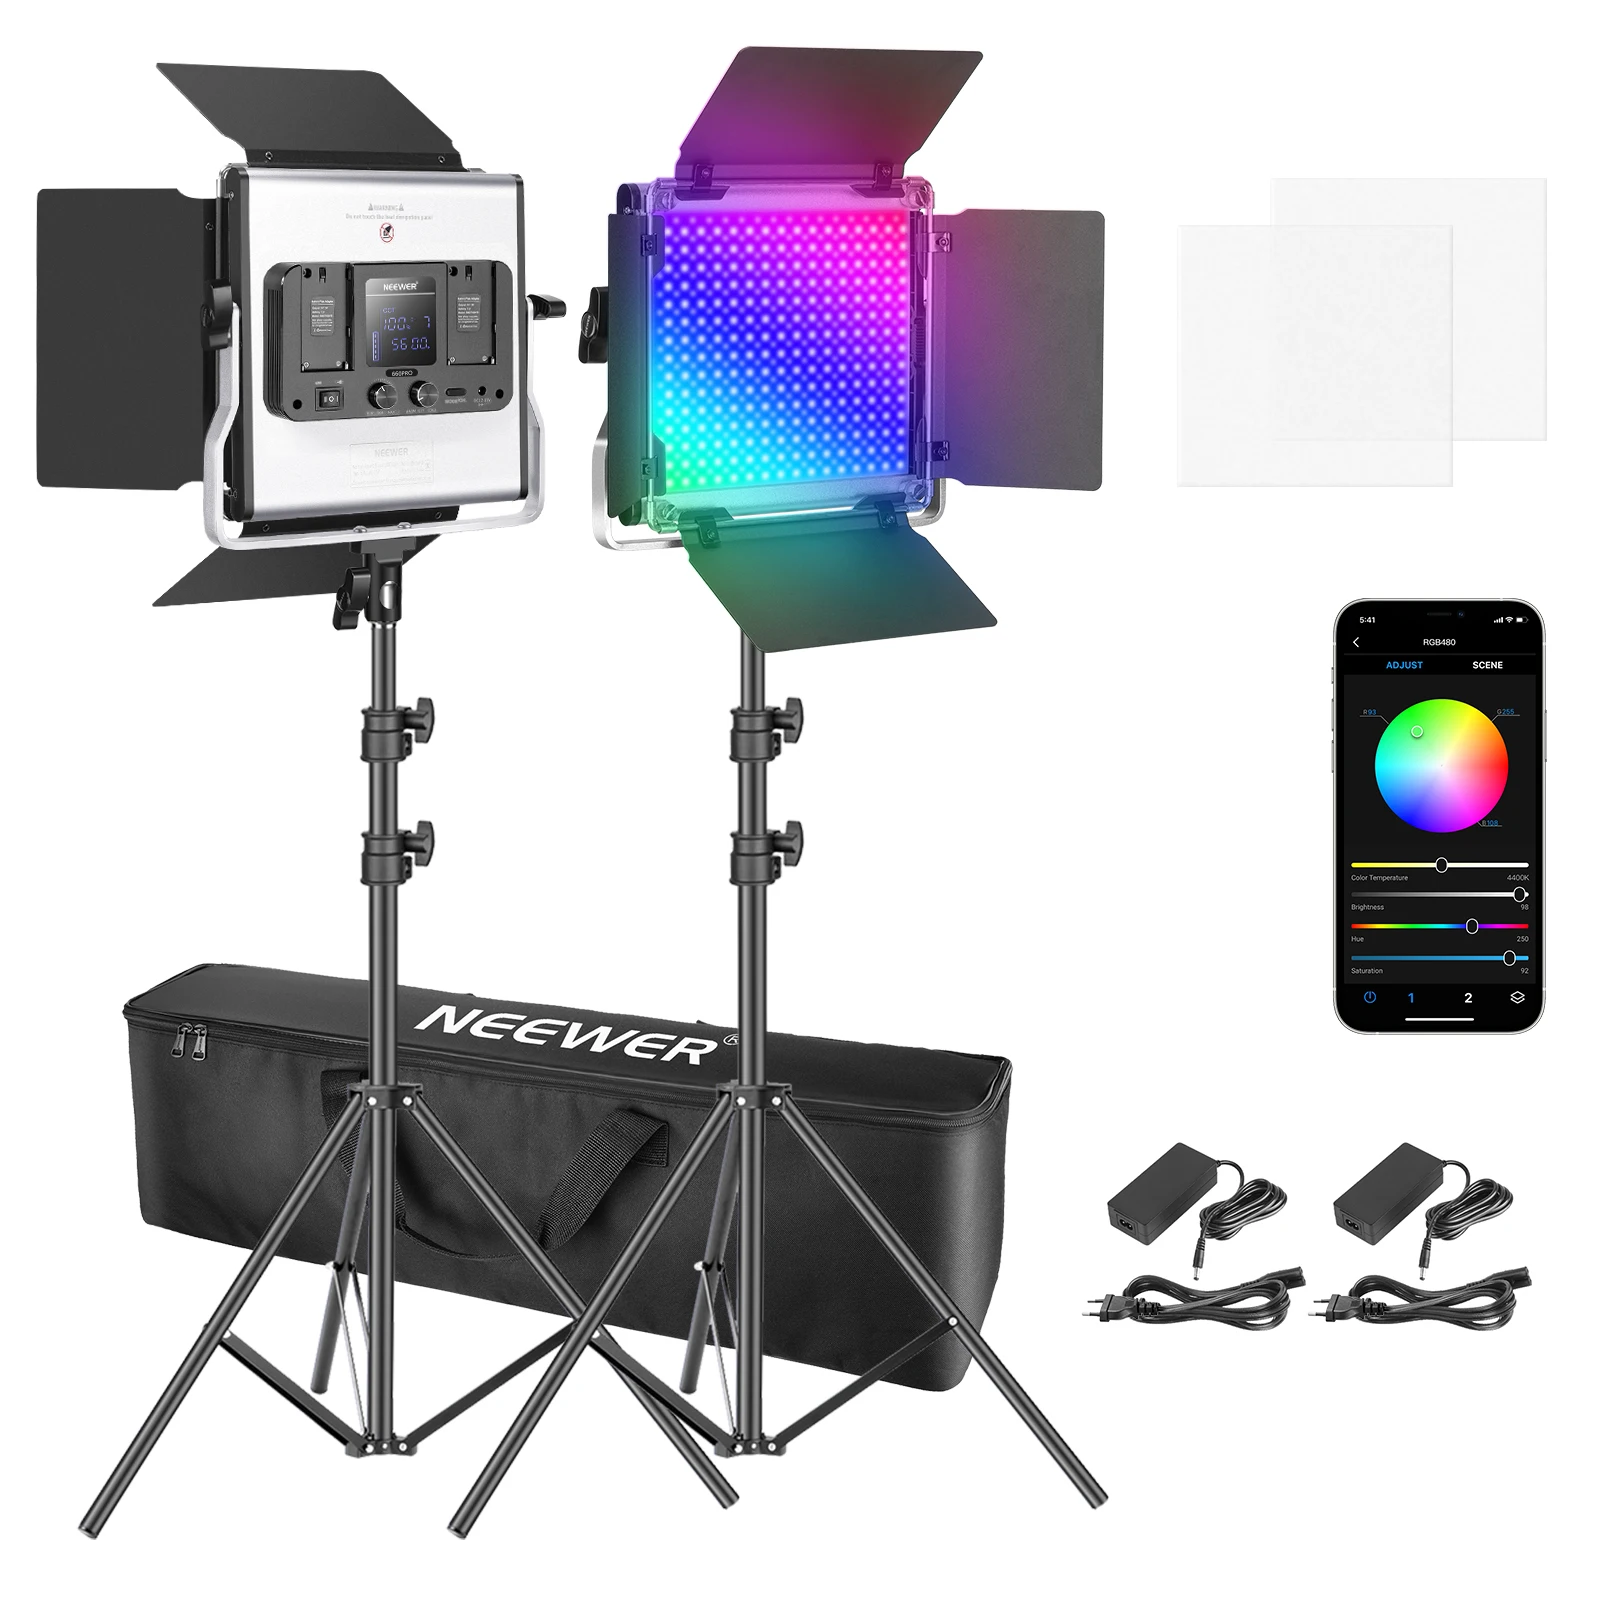 

Neewer 2 Packs 480 RGB Led Light With APP Control, Photography Video Lighting Kit With Stands And Bag, 480 SMD LEDs Adjustable